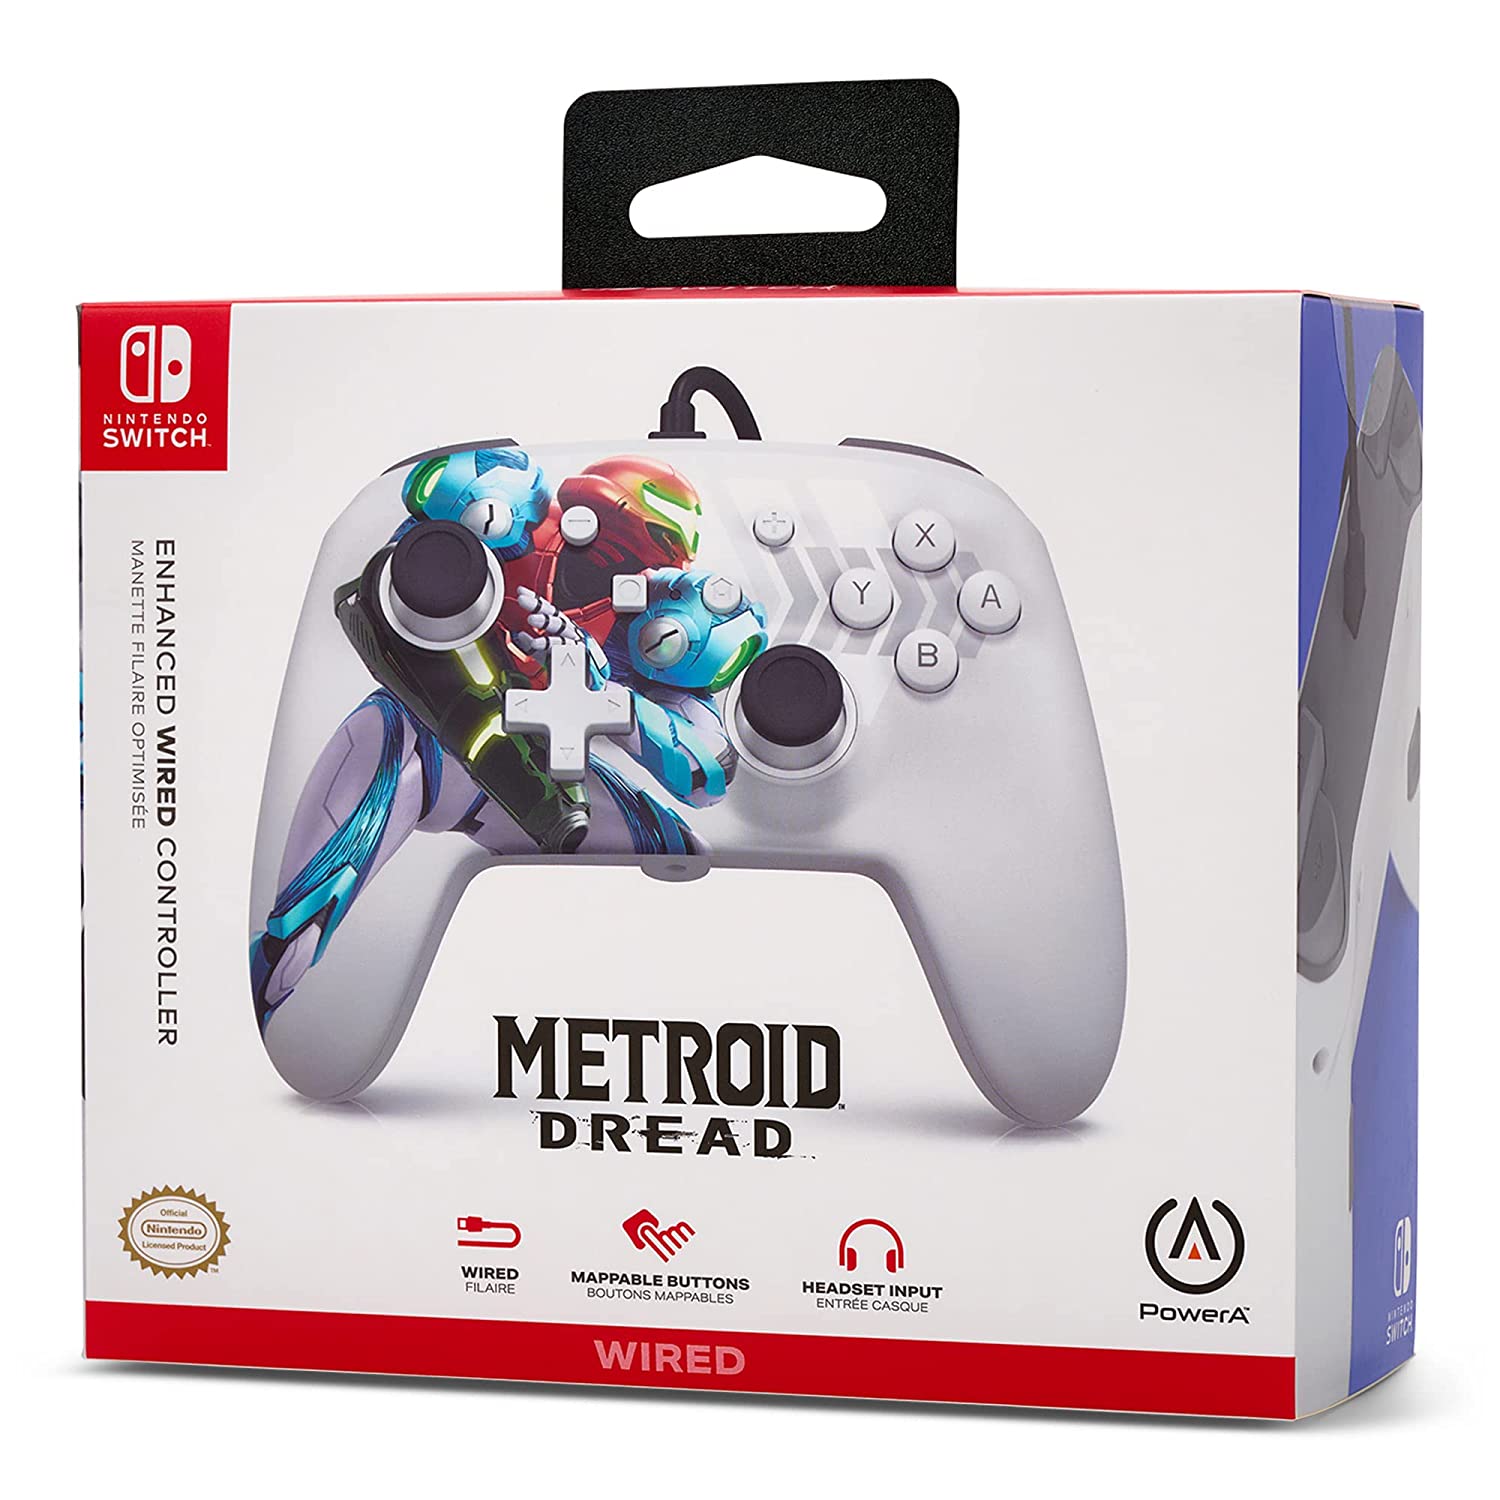 PowerA Enhanced Wired Controller for Nintendo Switch - Metroid Dread - New